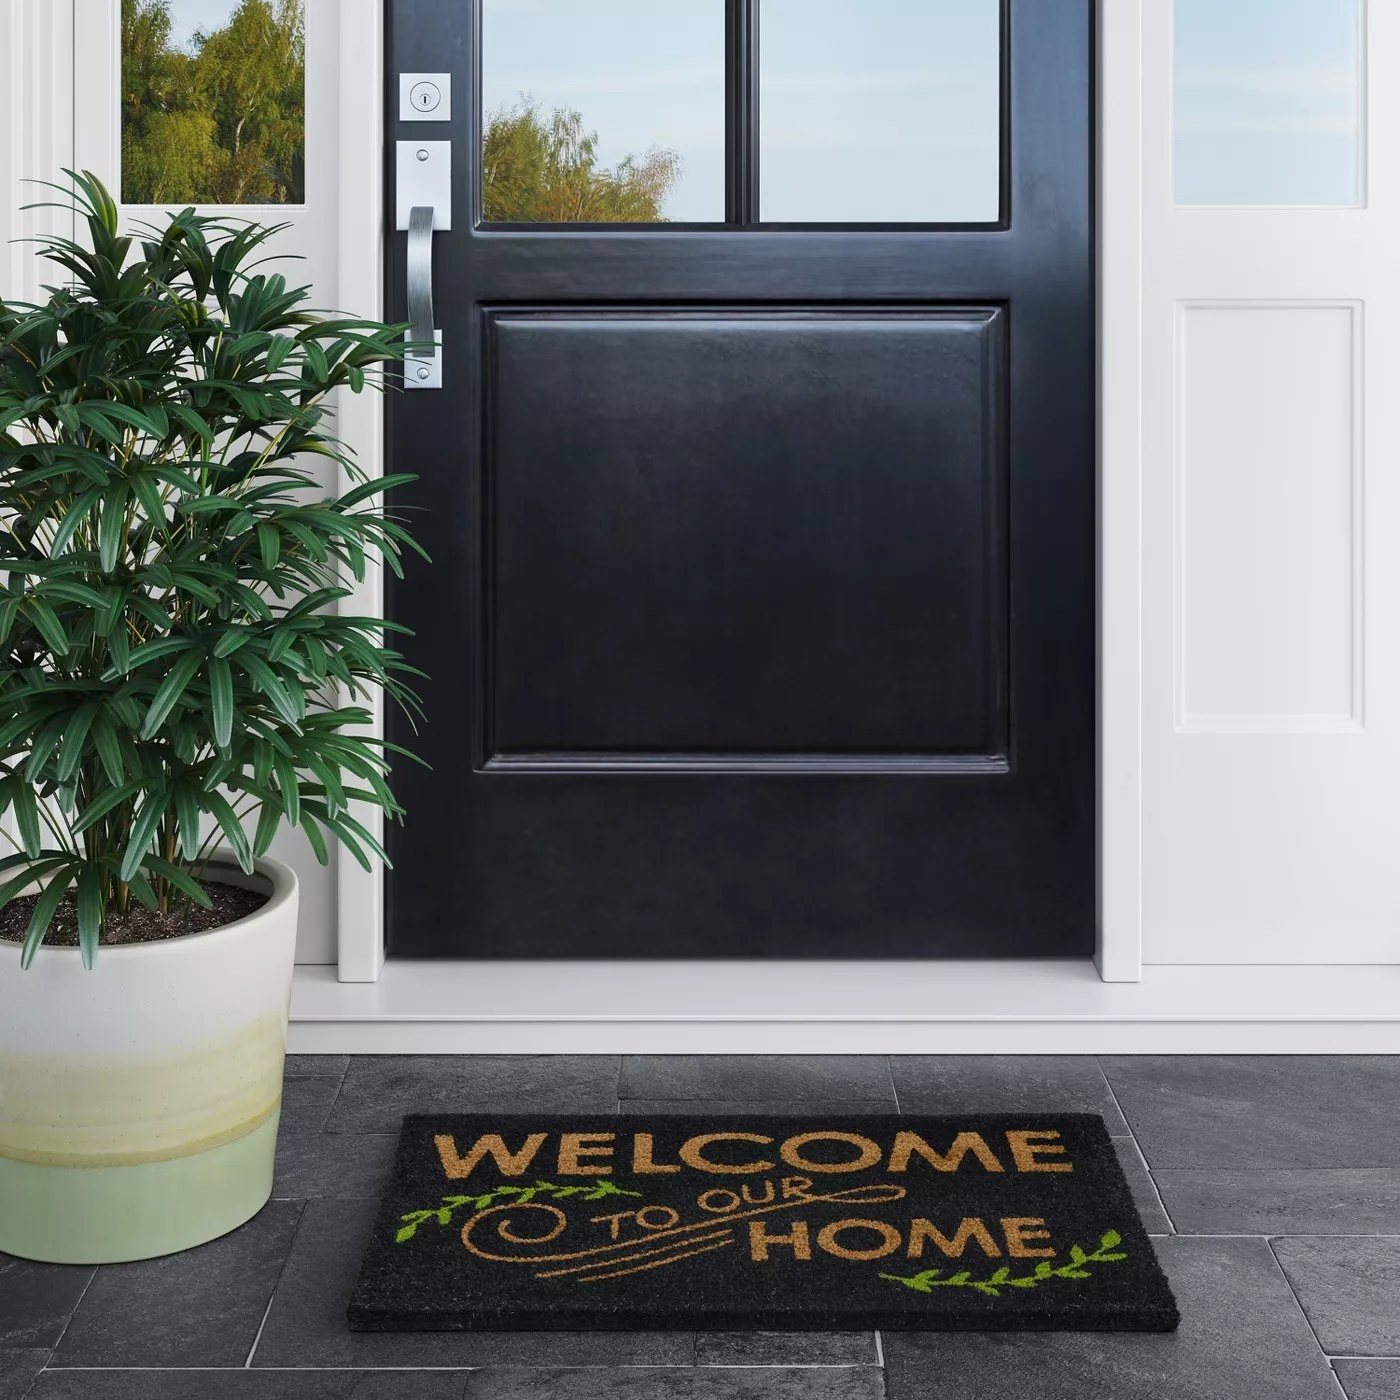 The welcome mat place before a front door